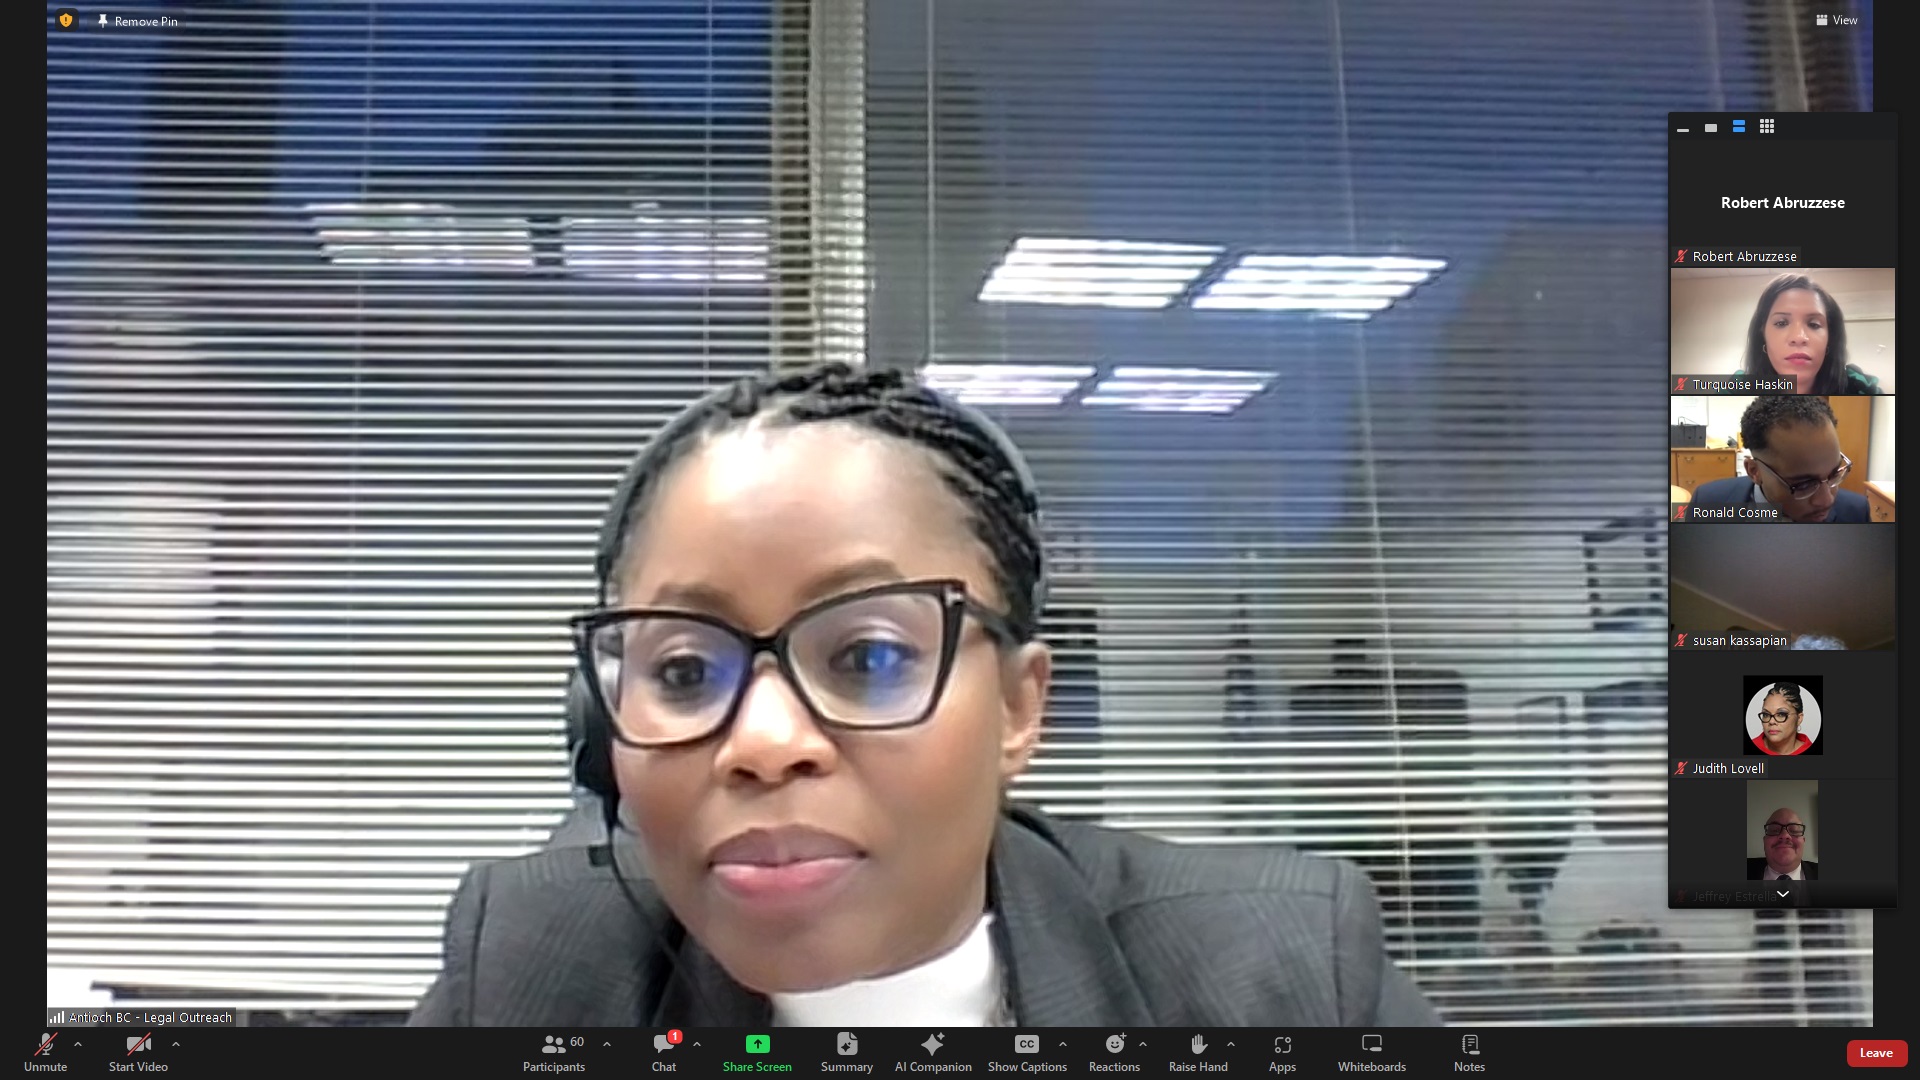 Judge Lola Waterman, chair of the Brooklyn Bar Association’s Access to Justice Committee, warmly opens the webinar and welcomes the public to the webinar on navigating Small Claims Court. Screenshots via Zoom “How to Navigate the Small Claims Court”